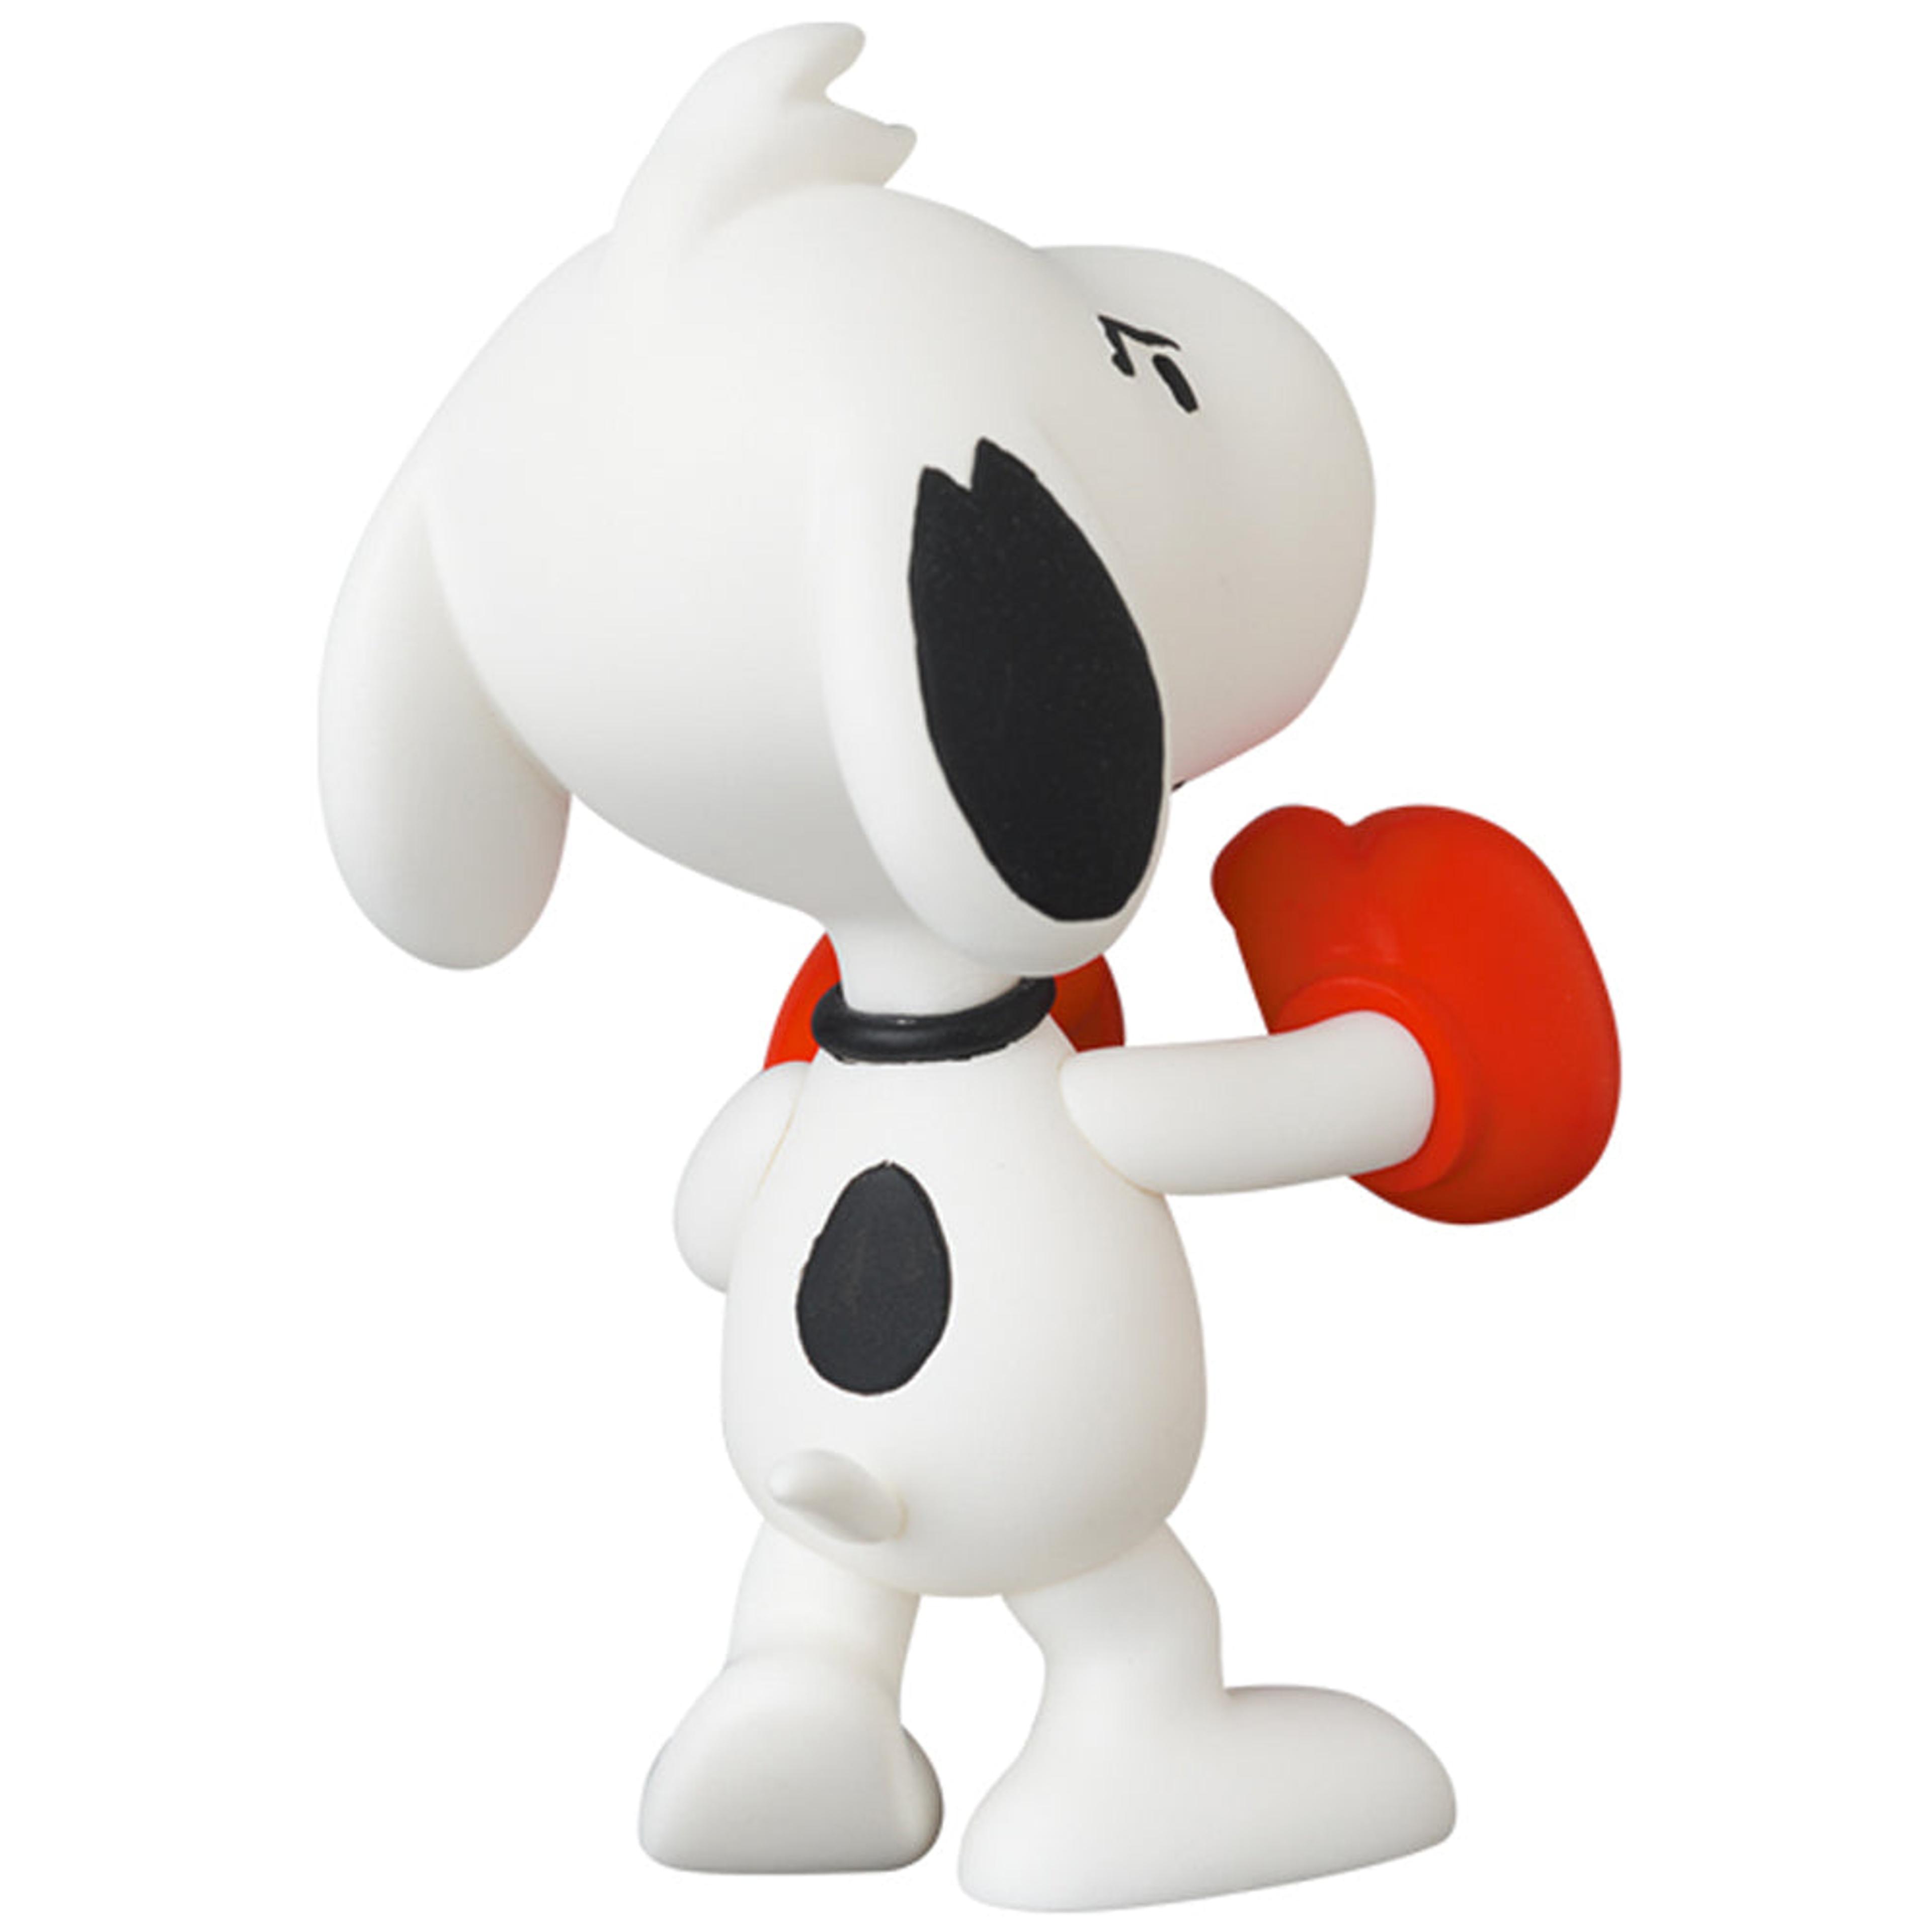 Alternate View 2 of UDF Peanuts Series 13: Boxing Snoopy Ultra Detail Figure by Medi